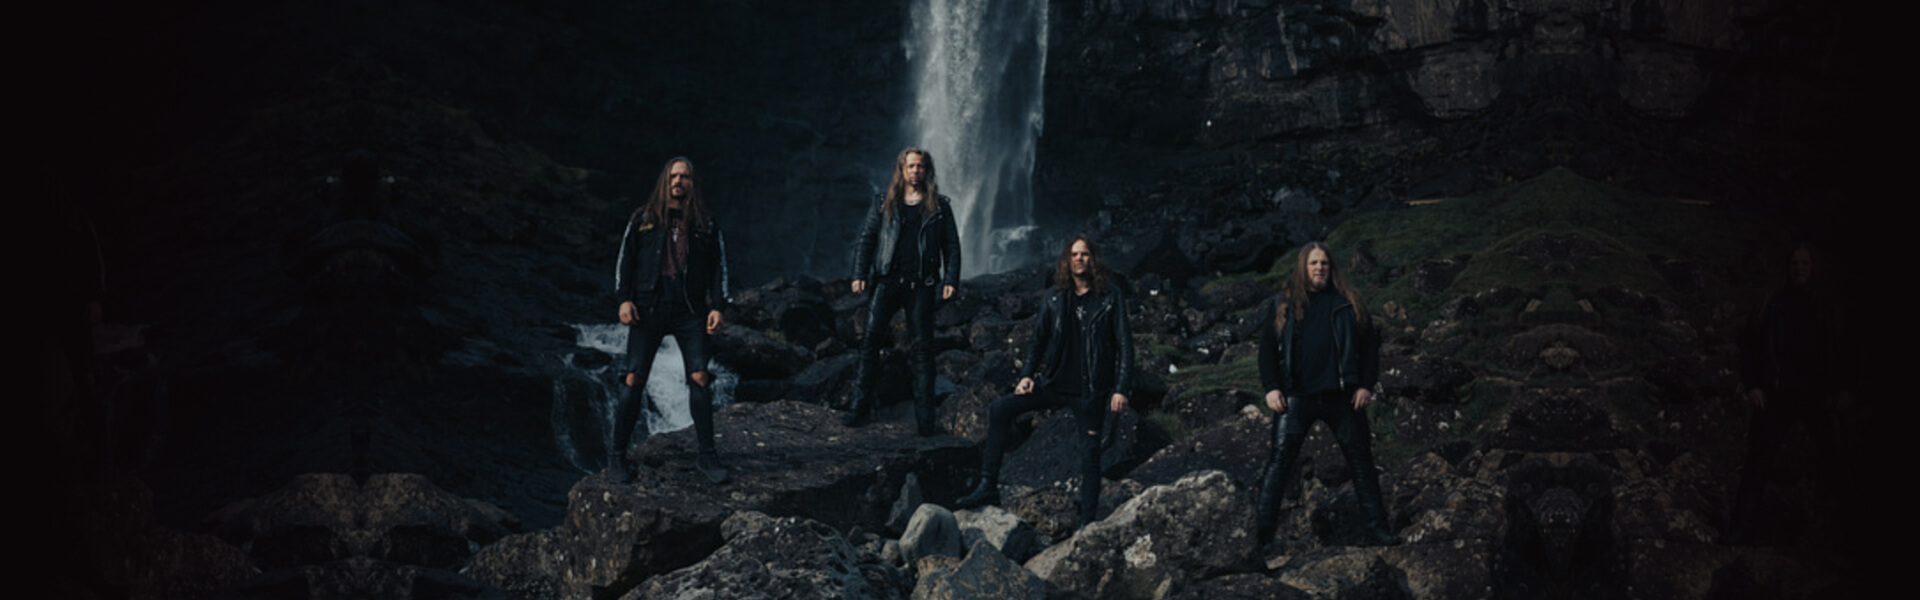 TÝR is definitely one of the most successful metal bands from the Faroe Islands.